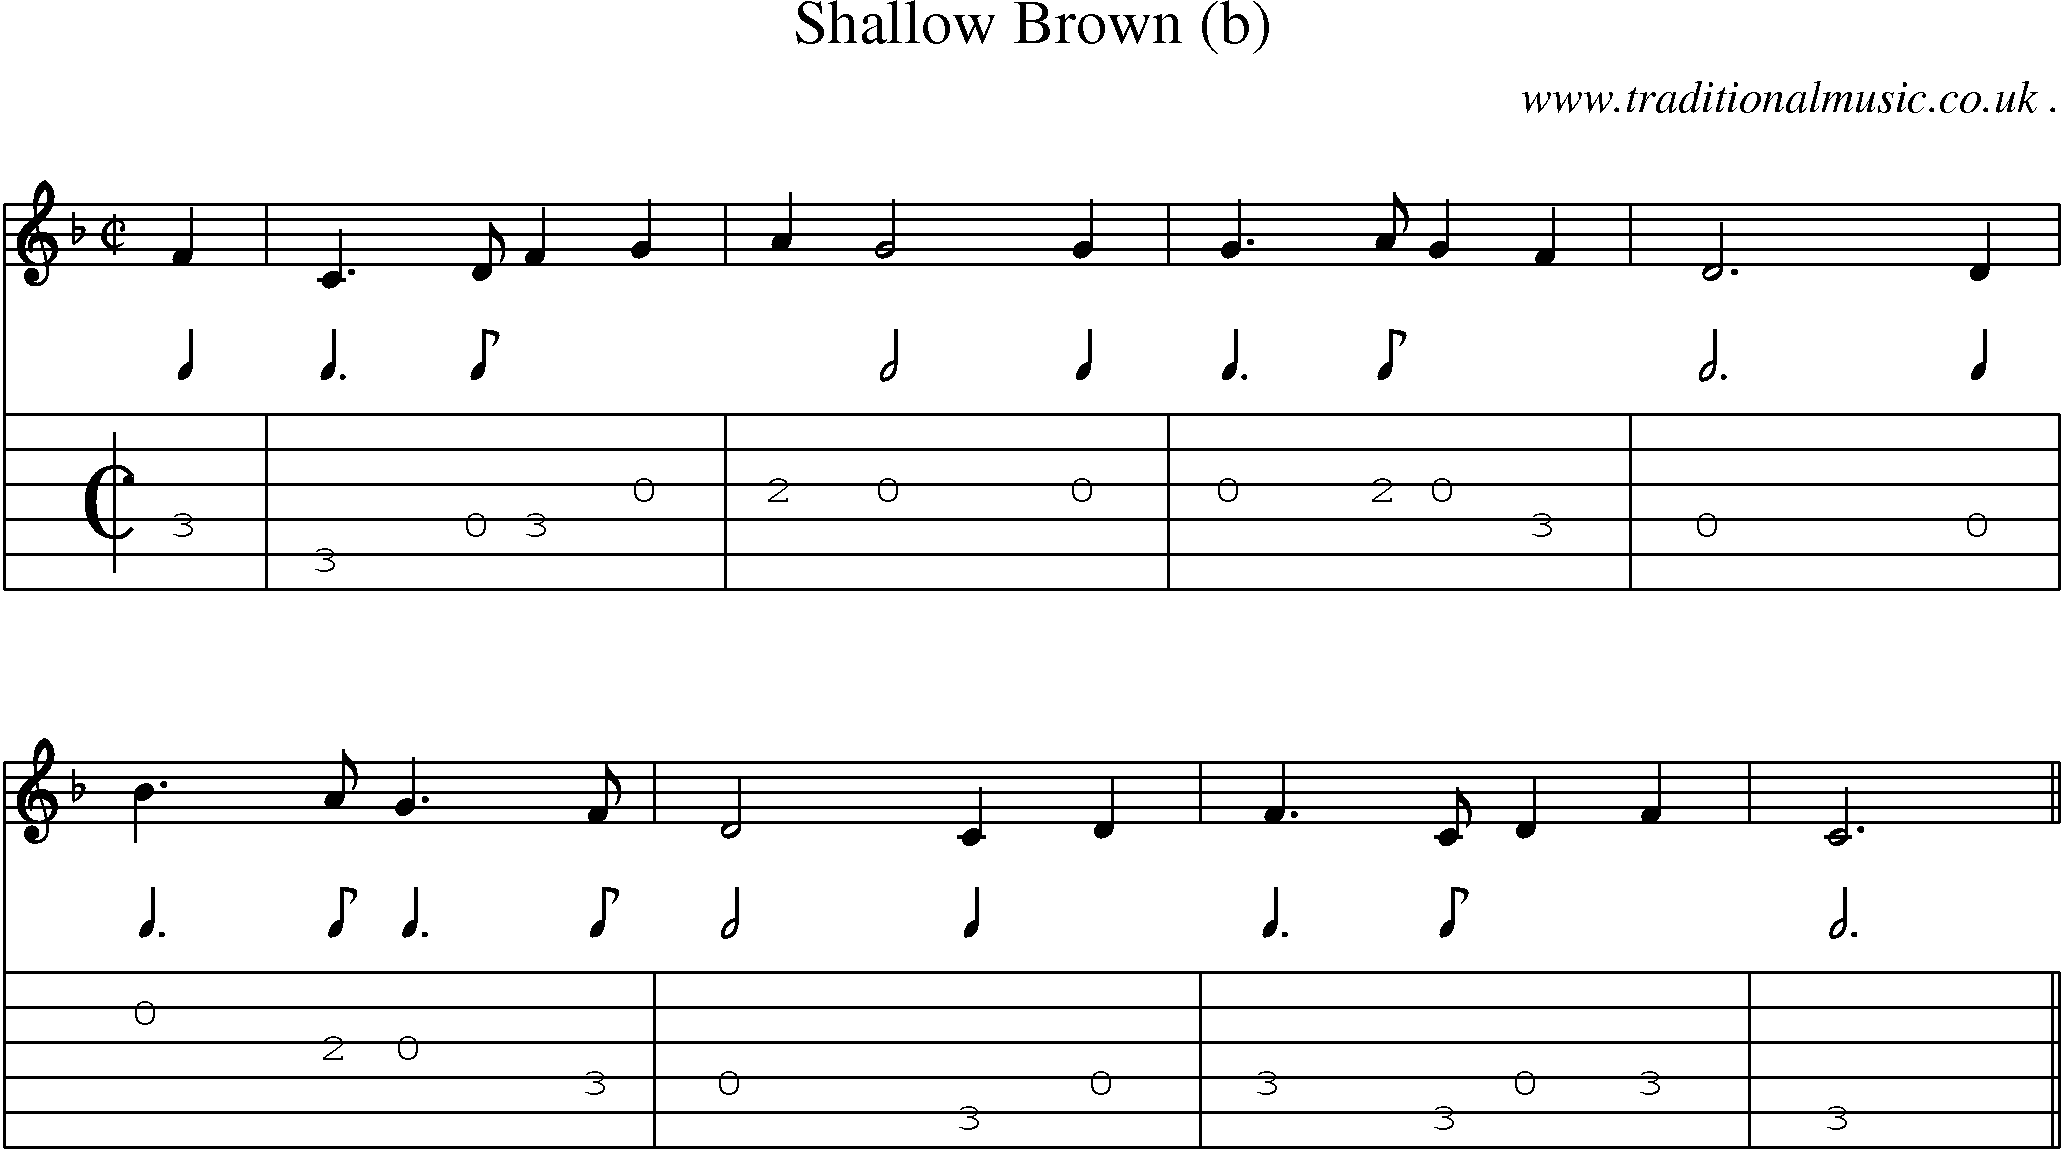 Sheet-Music and Guitar Tabs for Shallow Brown (b)